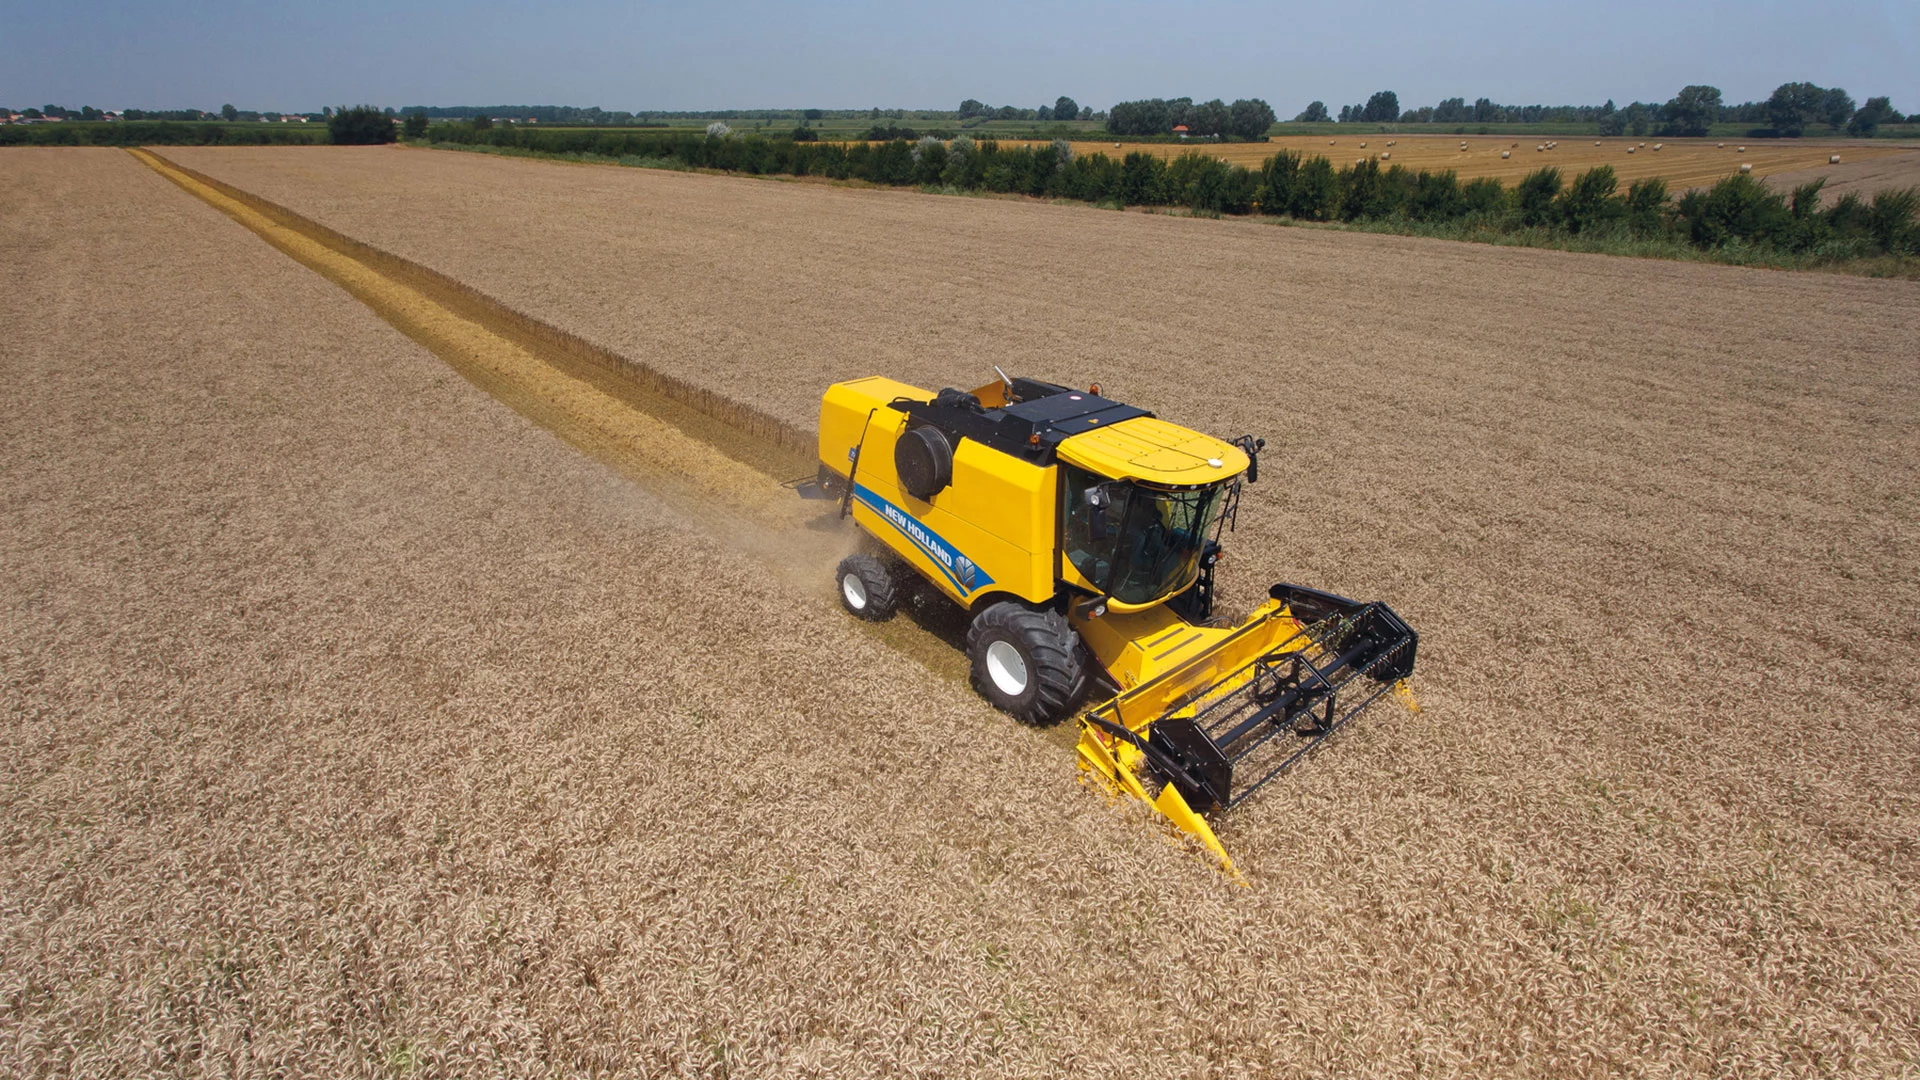 New Holland's TC Combine Harvester working on the field